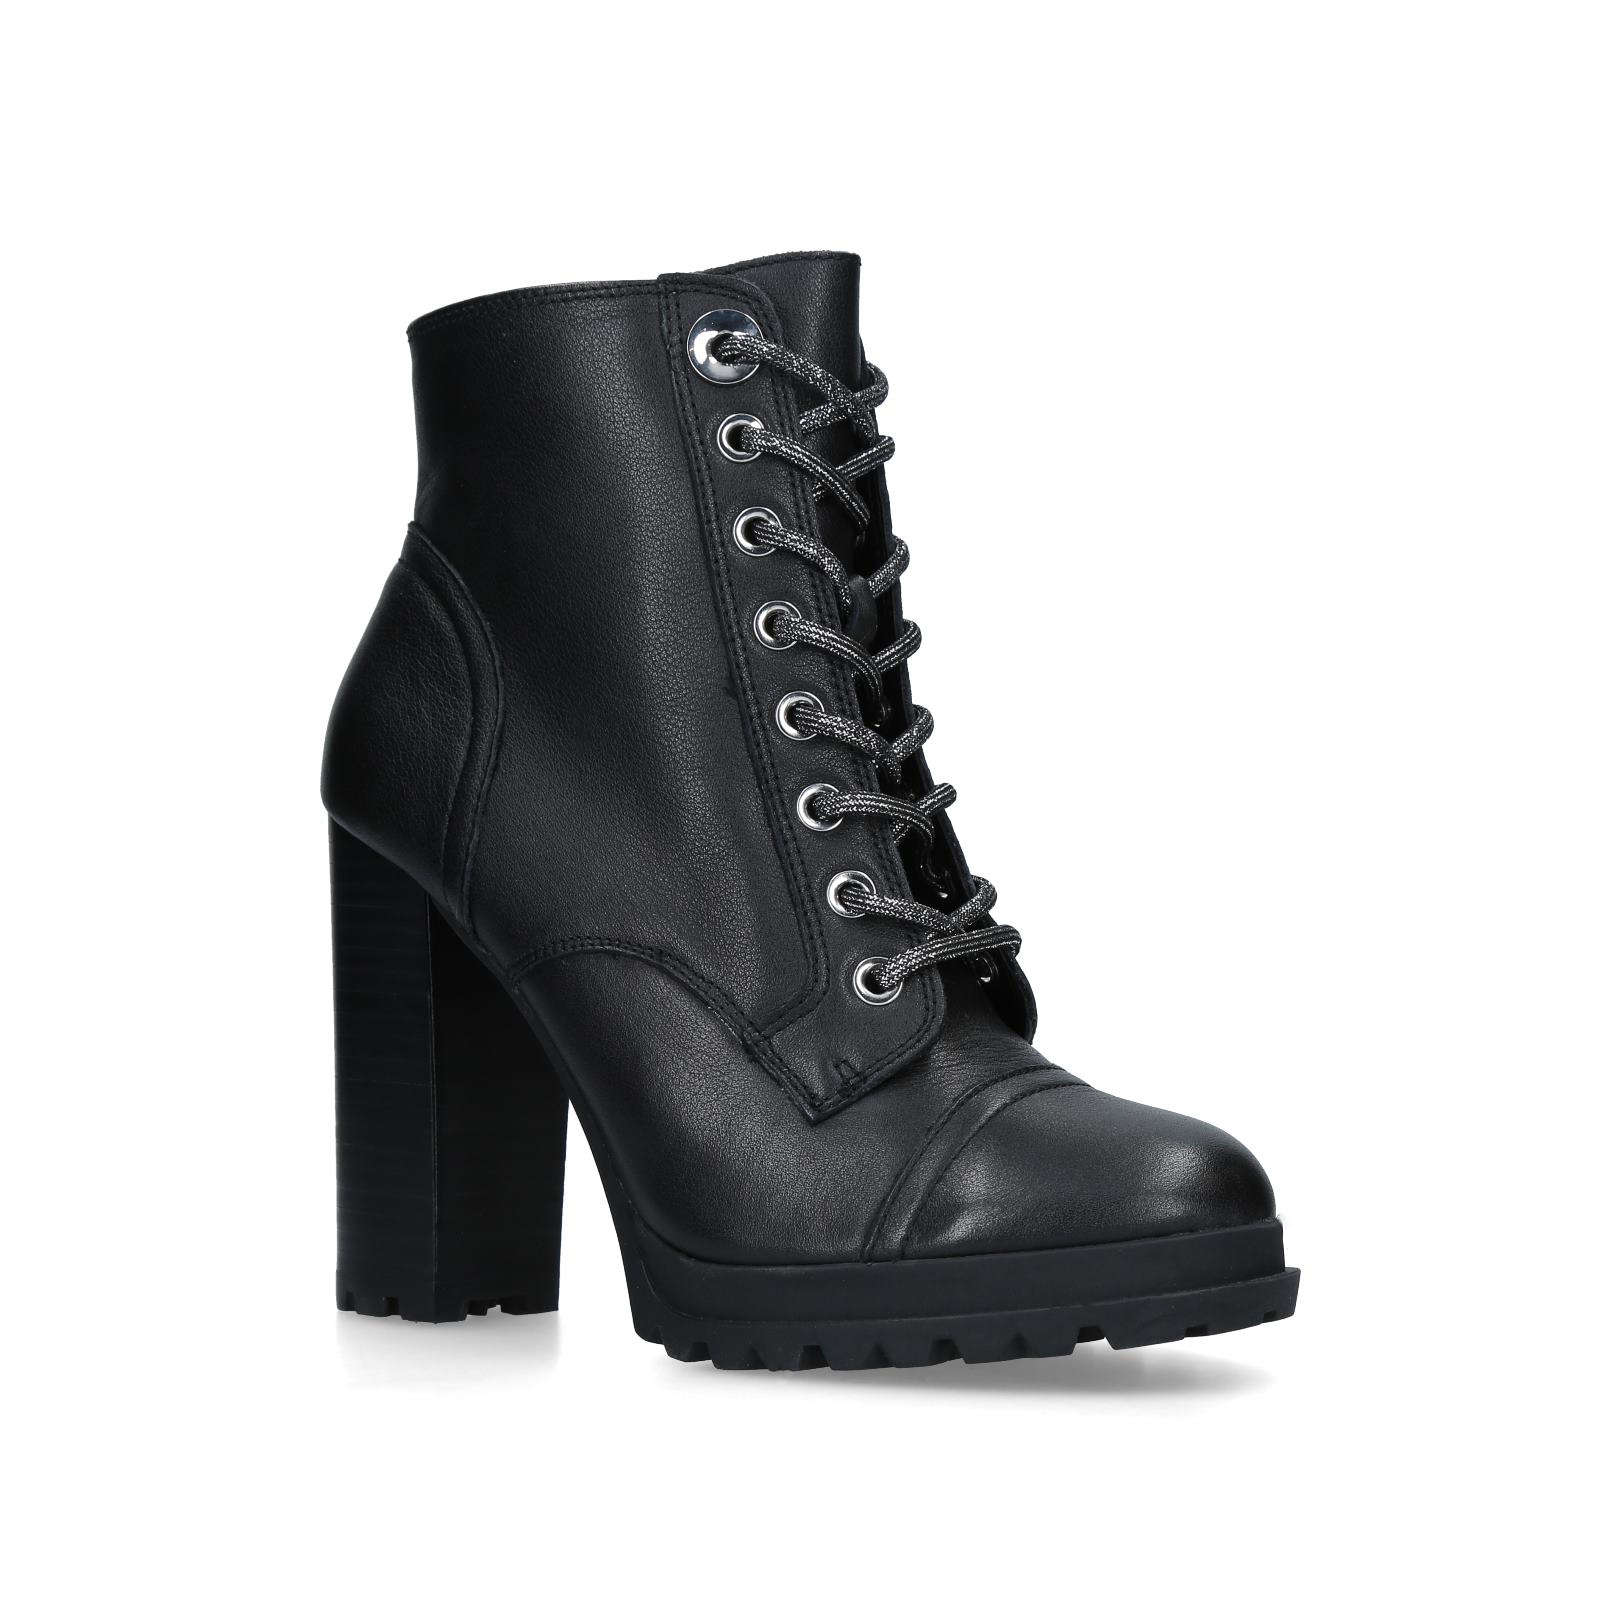 MARILLE - ALDO Ankle Boots